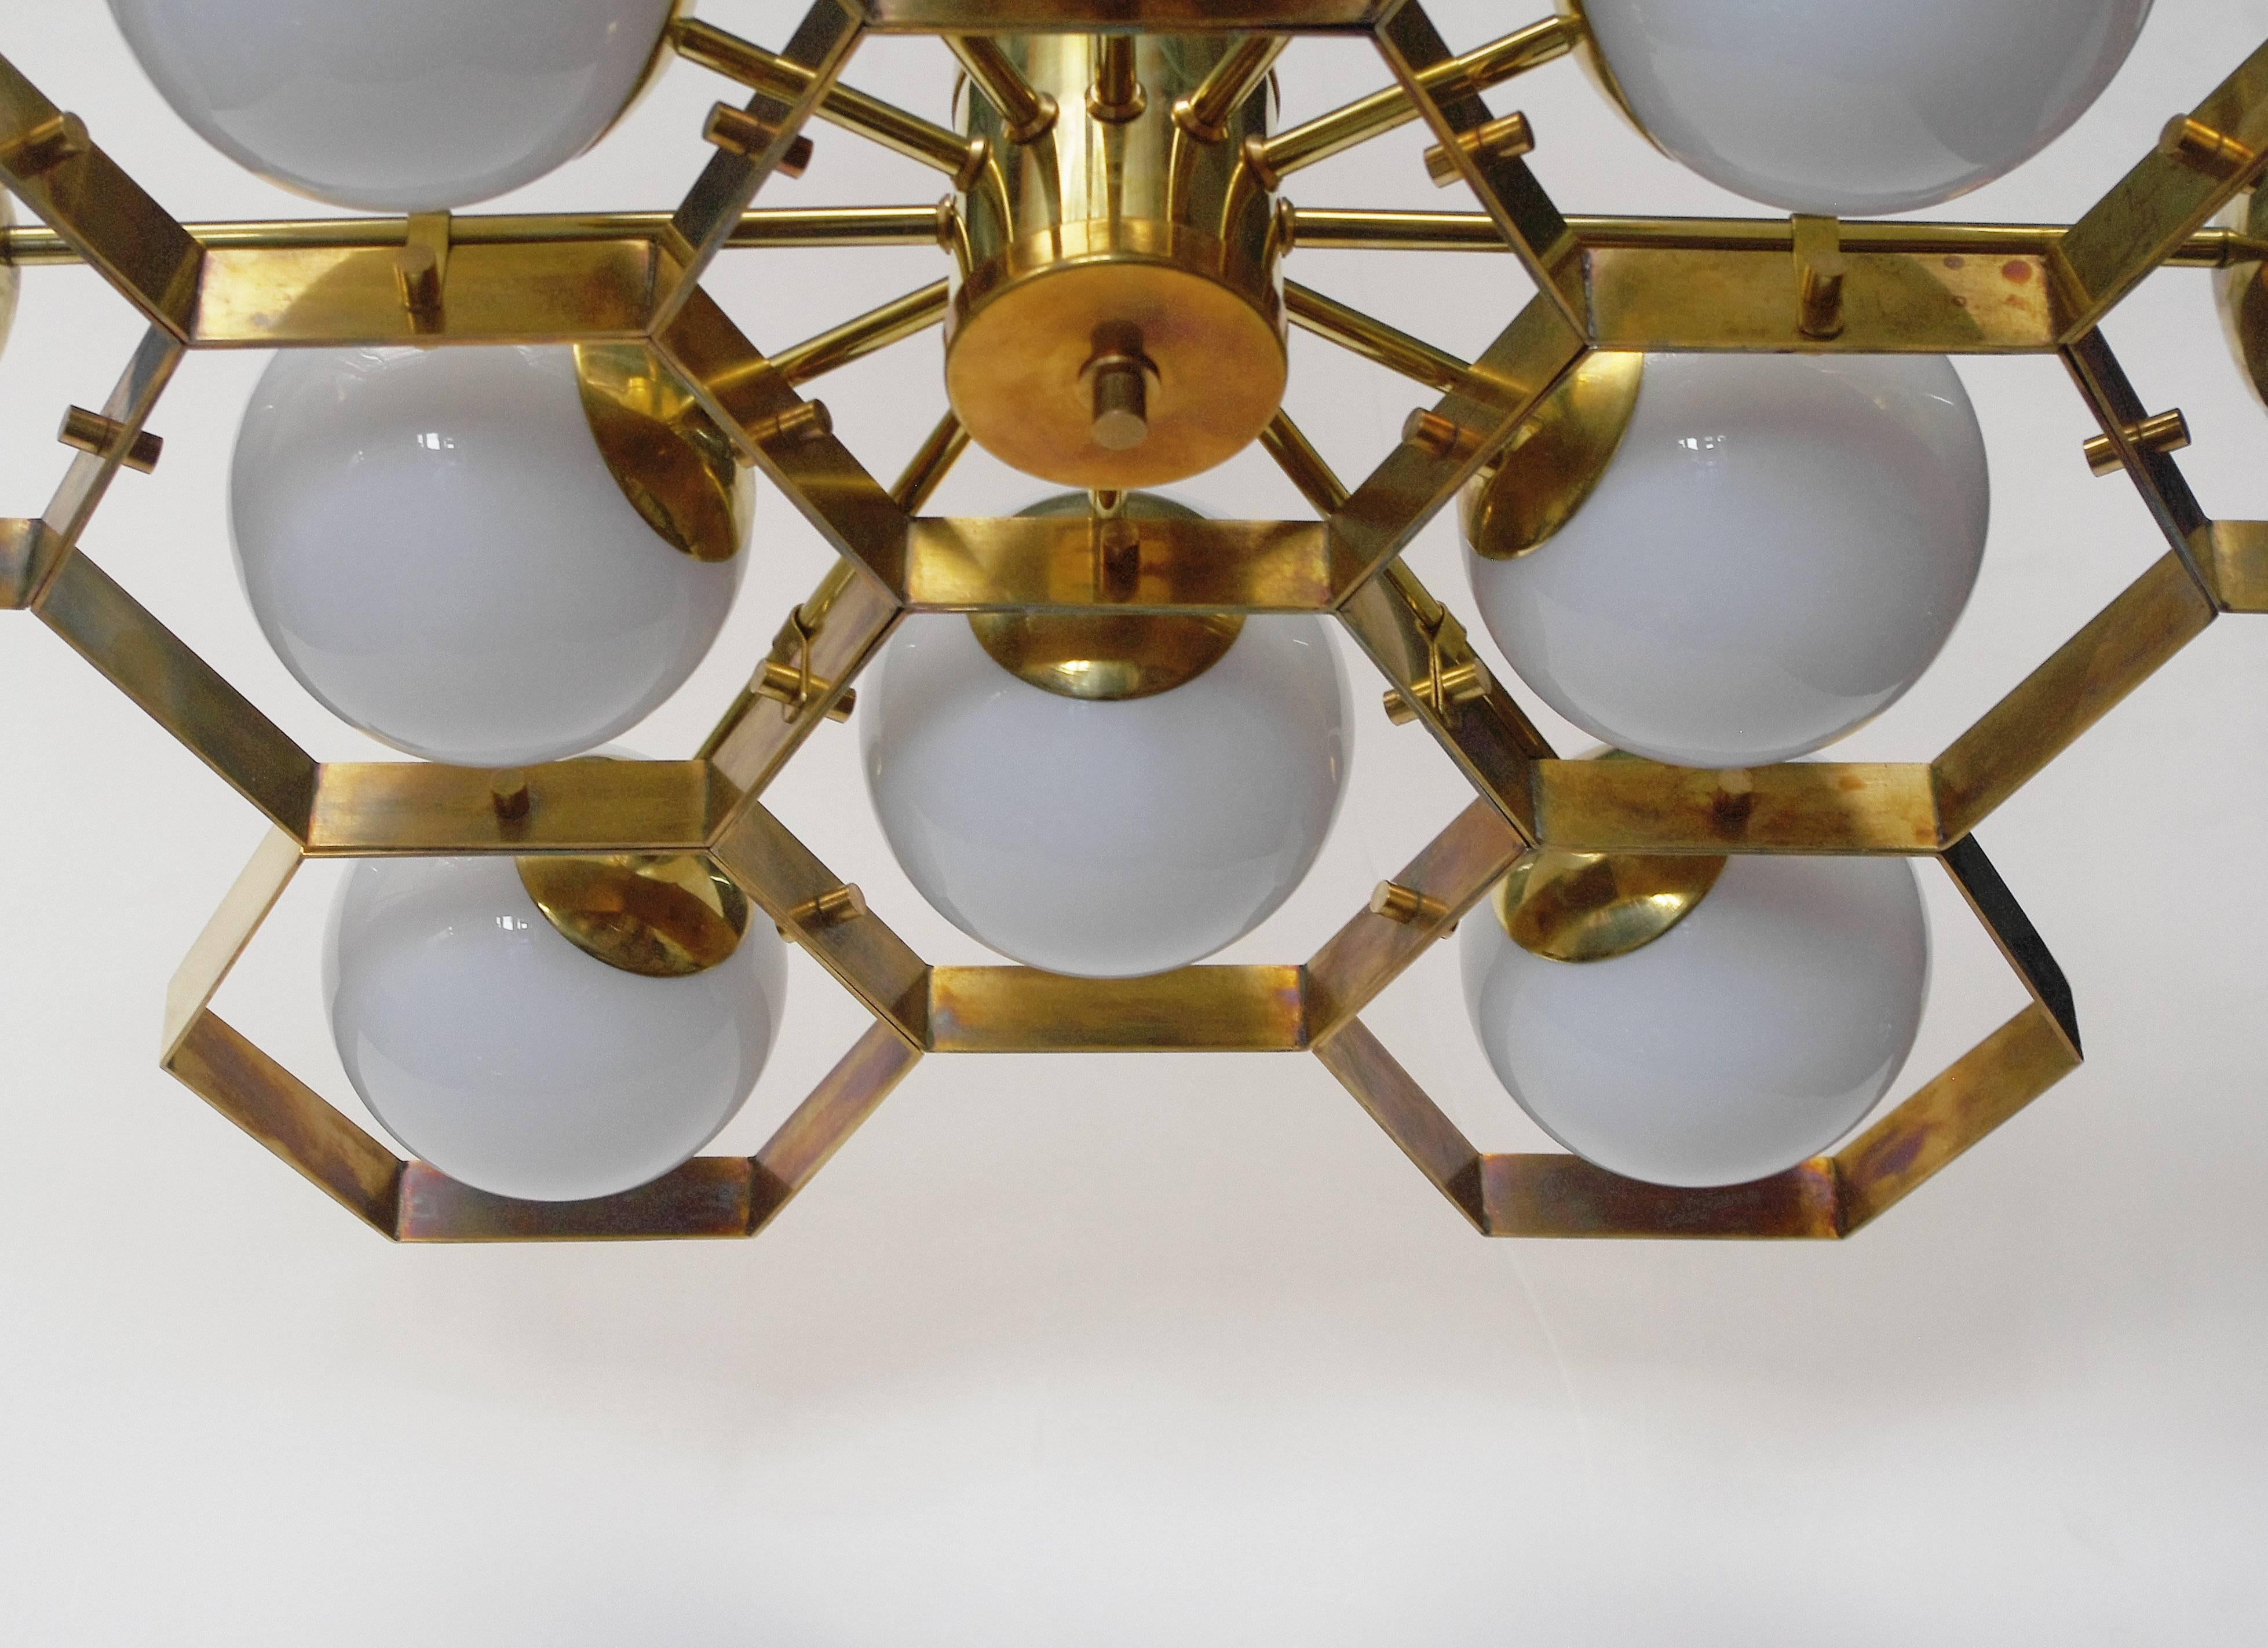 Italian modern Murano chandelier shown in glossy white Murano globes on unlacquered brass frame / Made in Italy 
12 lights / E12 or E14 type / max 40W each  
Diameter: 36 inches / Height: 30 inches including rod
1 in stock in Palm Springs currently